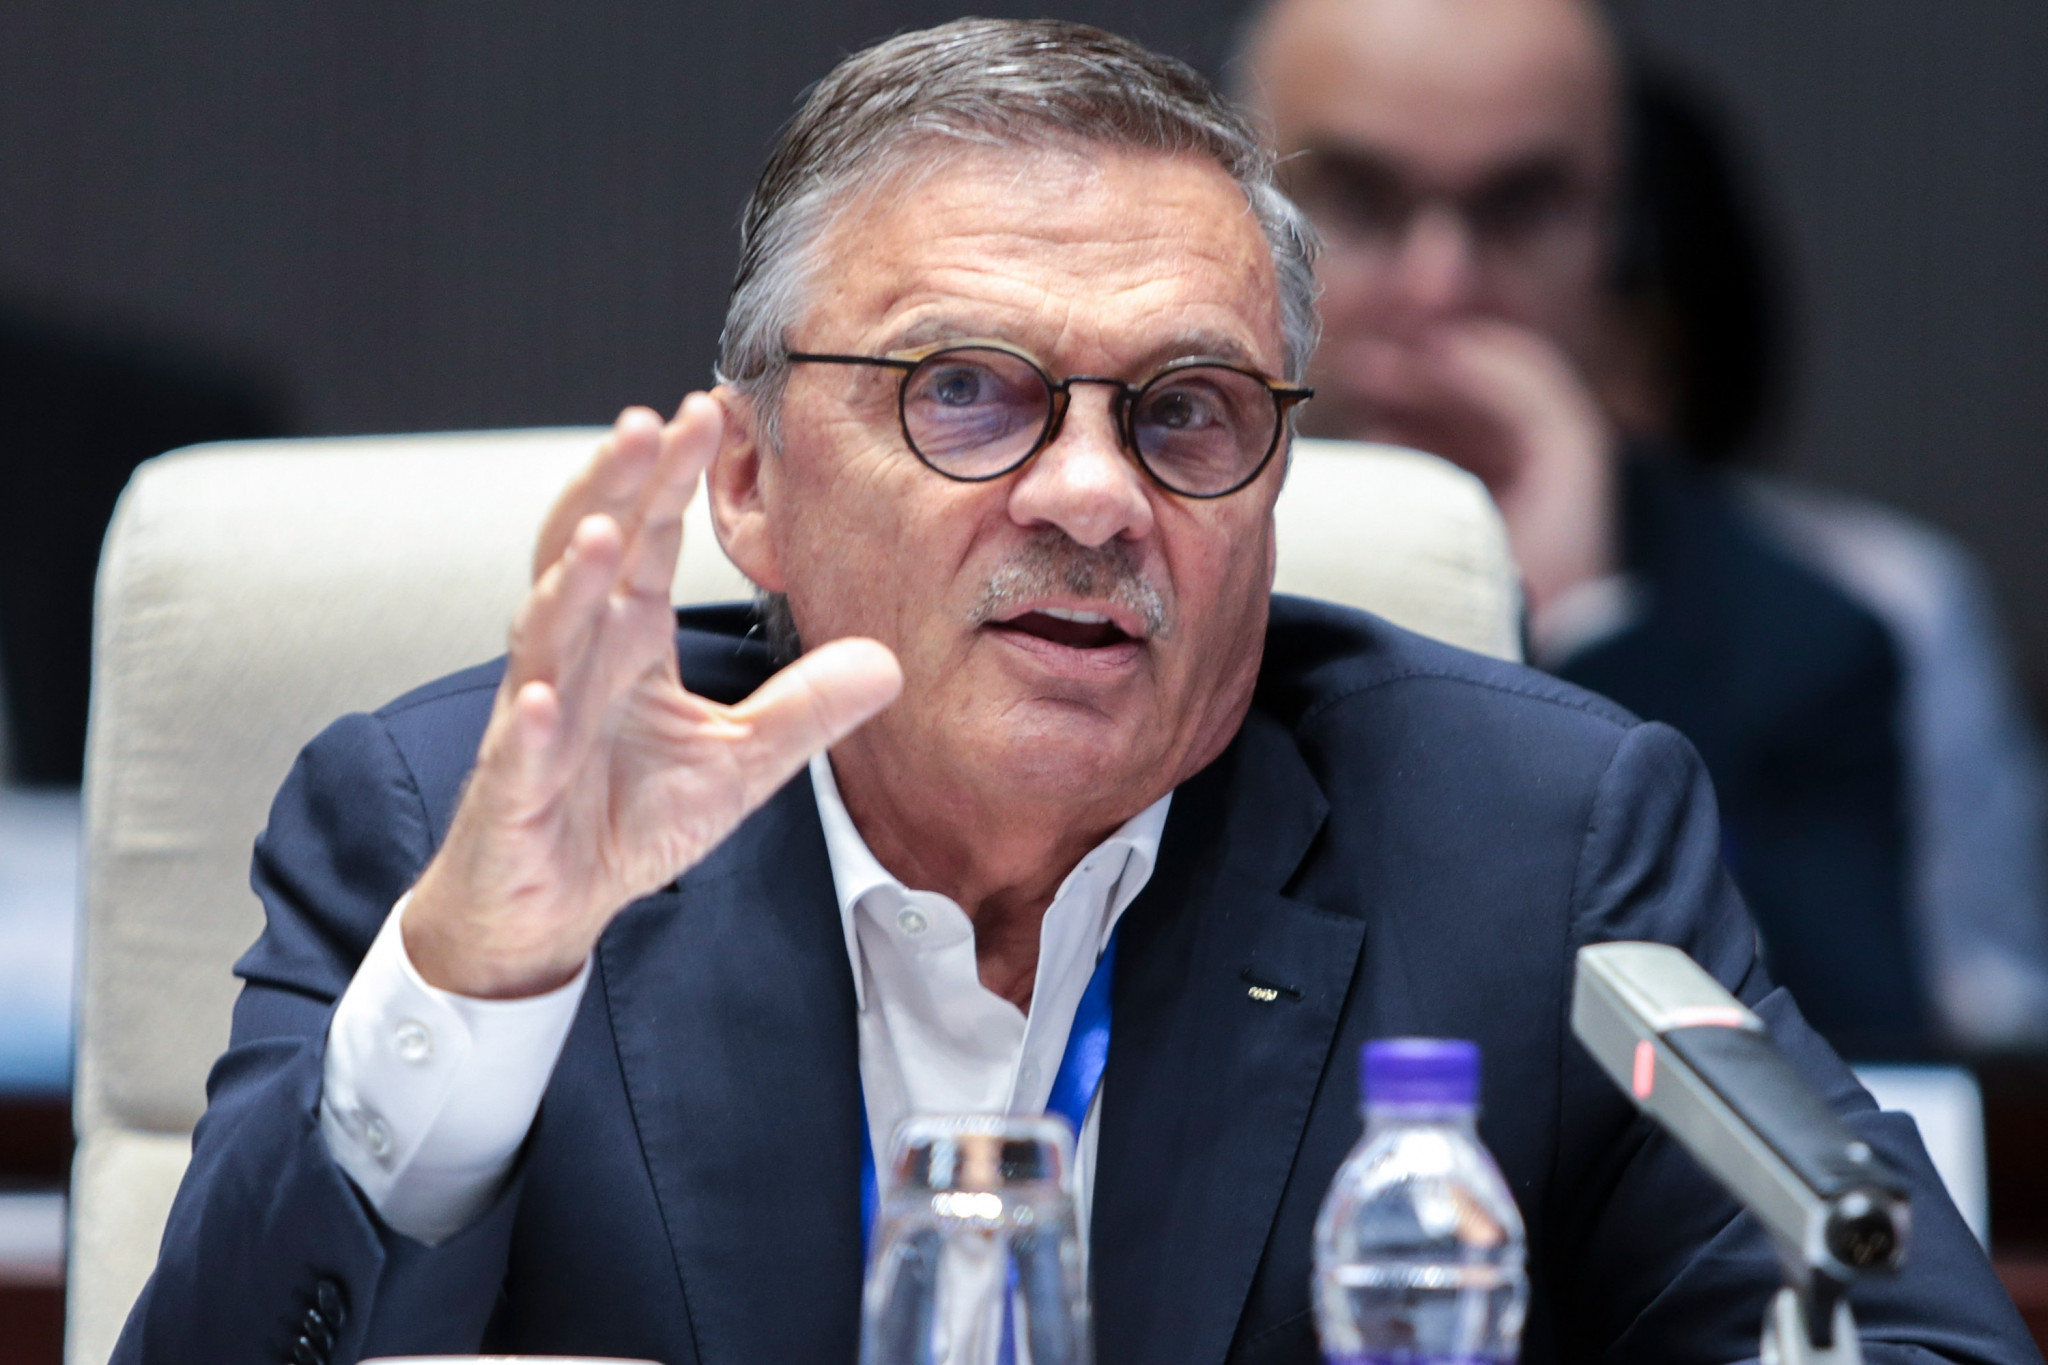 René Fasel has been IIHF President since 1994, but his replacement will be elected in Saint Petersburg later this month ©Getty Images